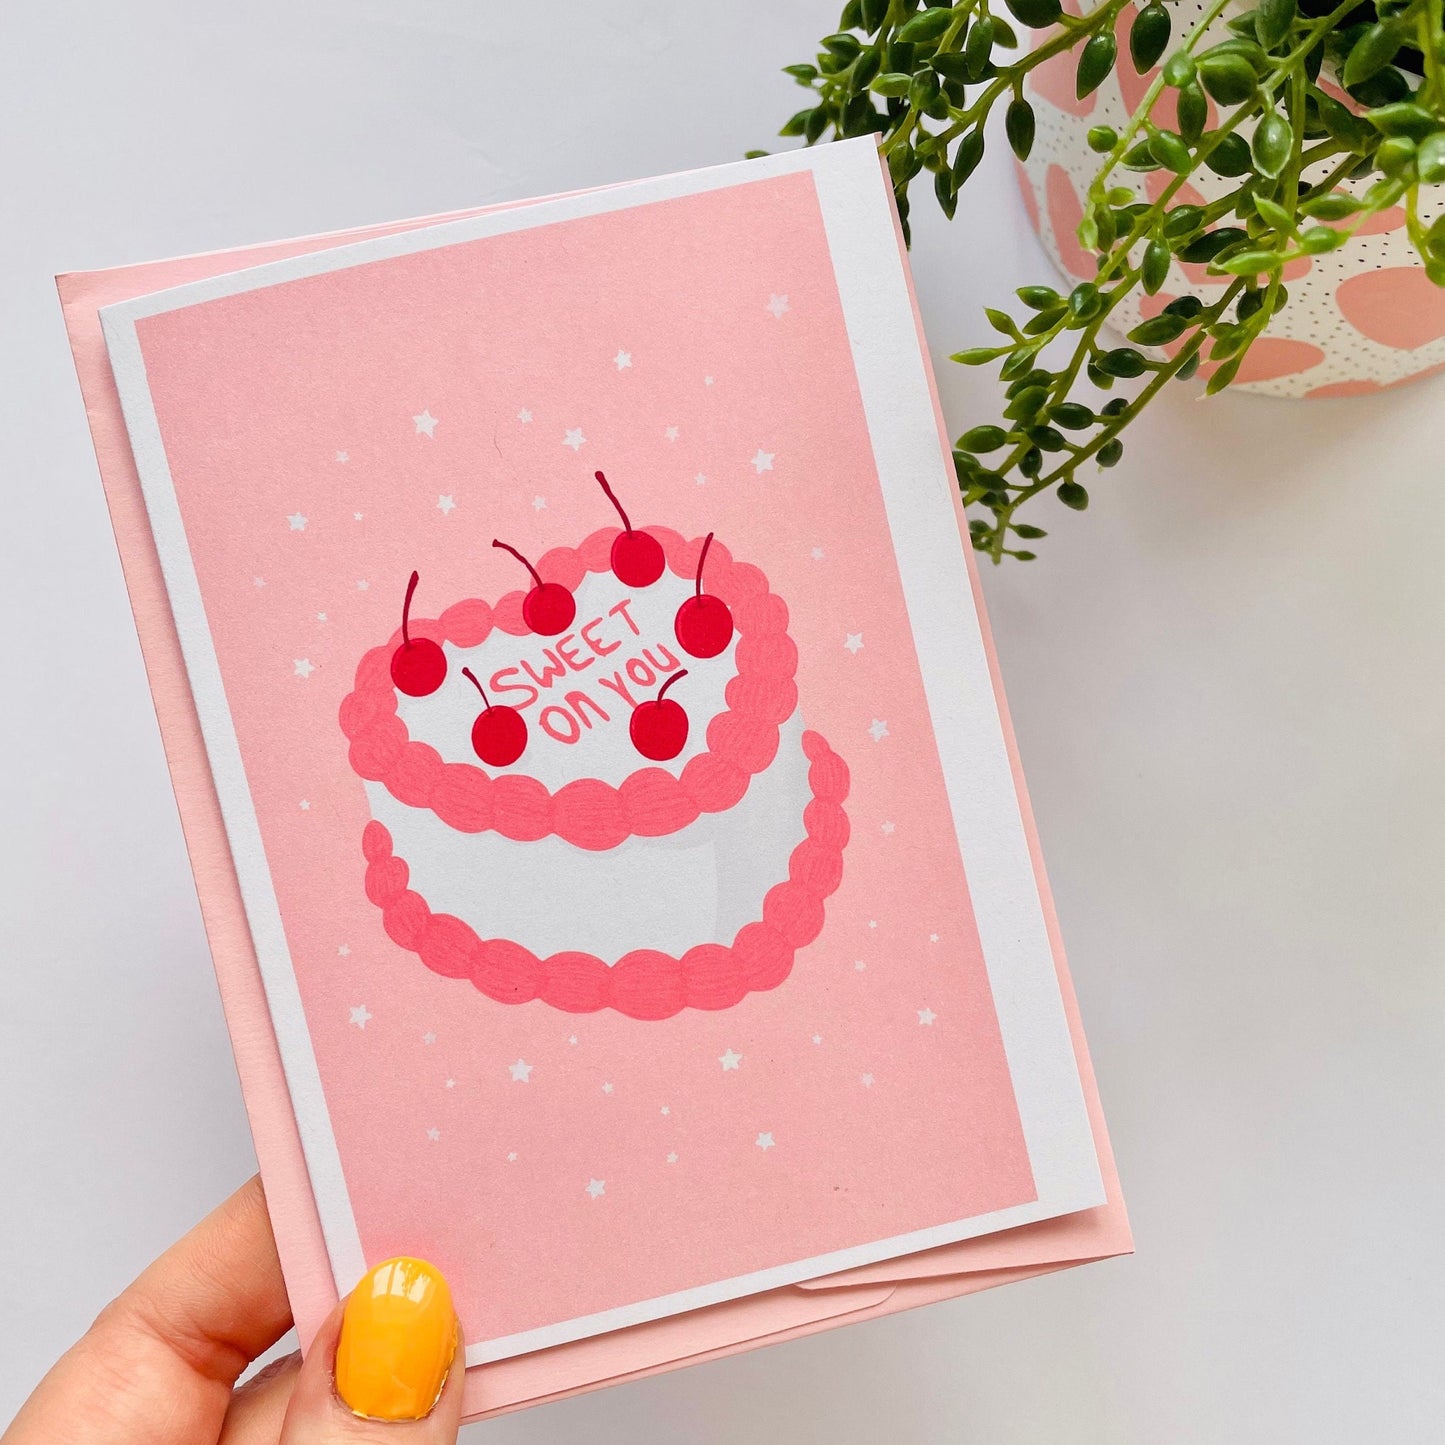 Sweet On You Cake A6 Greetings Card